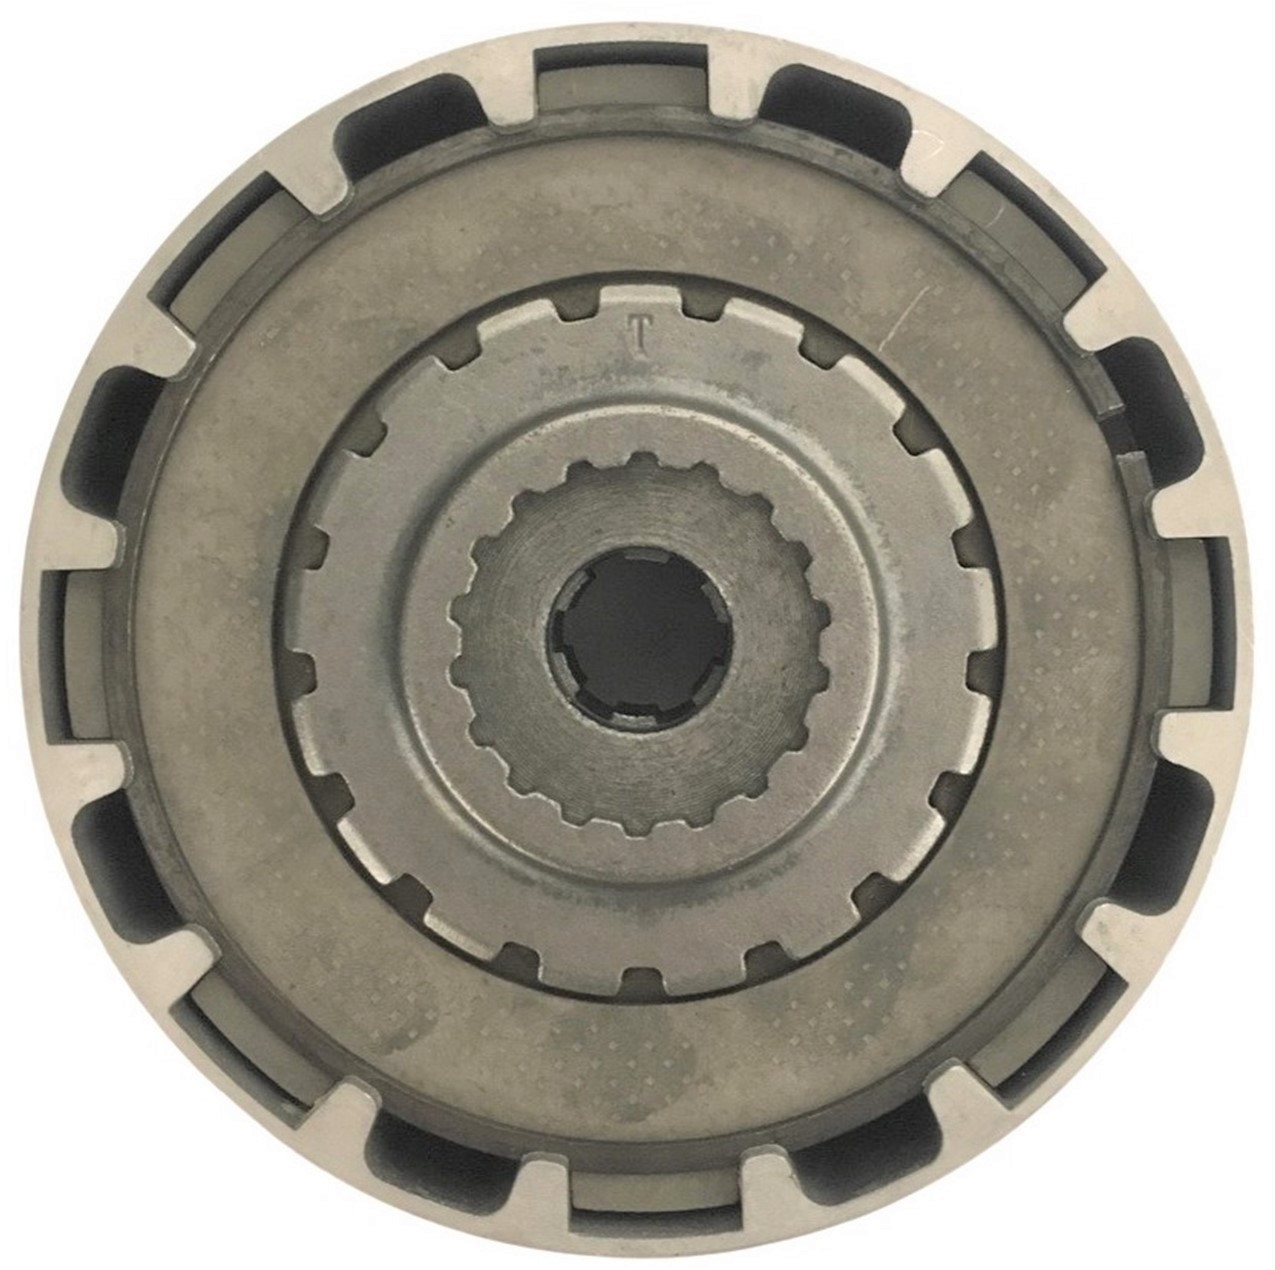 Rear Clutch 50-125cc Honda Copy Manual Clutch Fits Most Chinese ATVs, Dirtbikes Clutch OD=116 Shaft=17mm 18th Gear - Click Image to Close